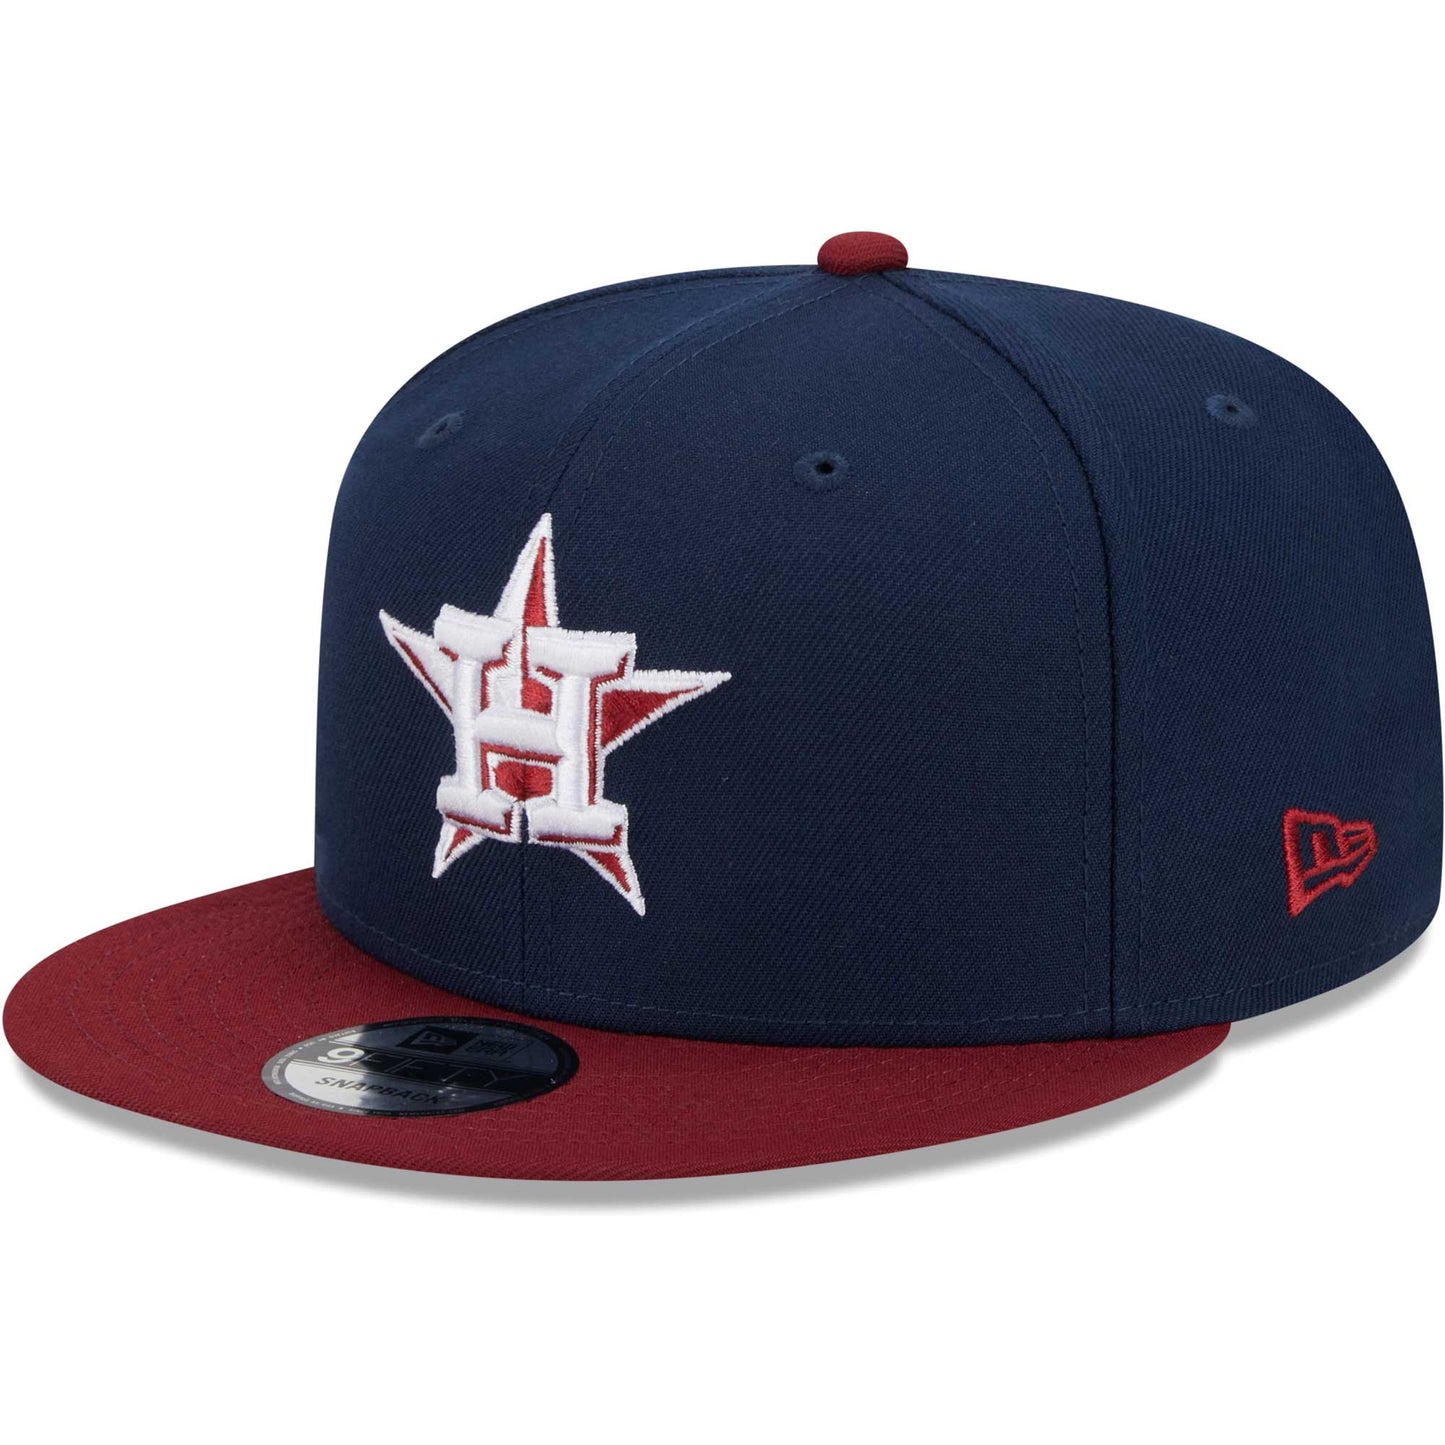 Houston Astros New Era Two-Tone Color Pack 9FIFTY Snapback Hat - Navy